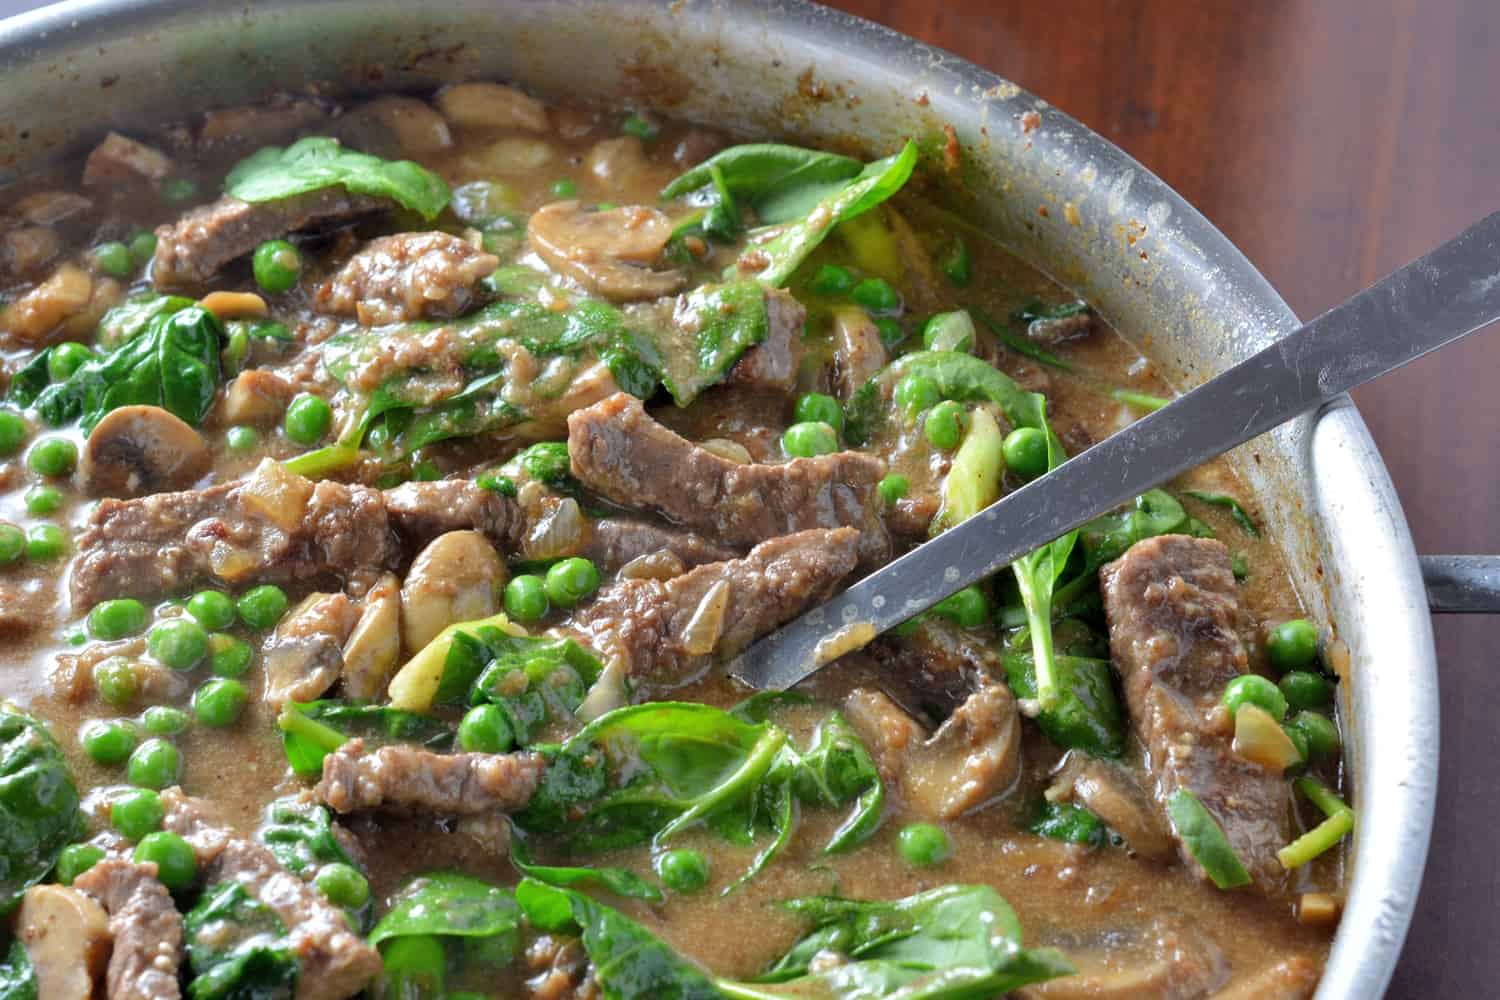 Skinny Beef Stroganoff Recipe- Fast, easy to make, beef stroganoff, that is family friendly and cuts down on calories by using yogurt instead of cream or sour cream. Added peas and spinach make this beef stroganoff THE BEST!